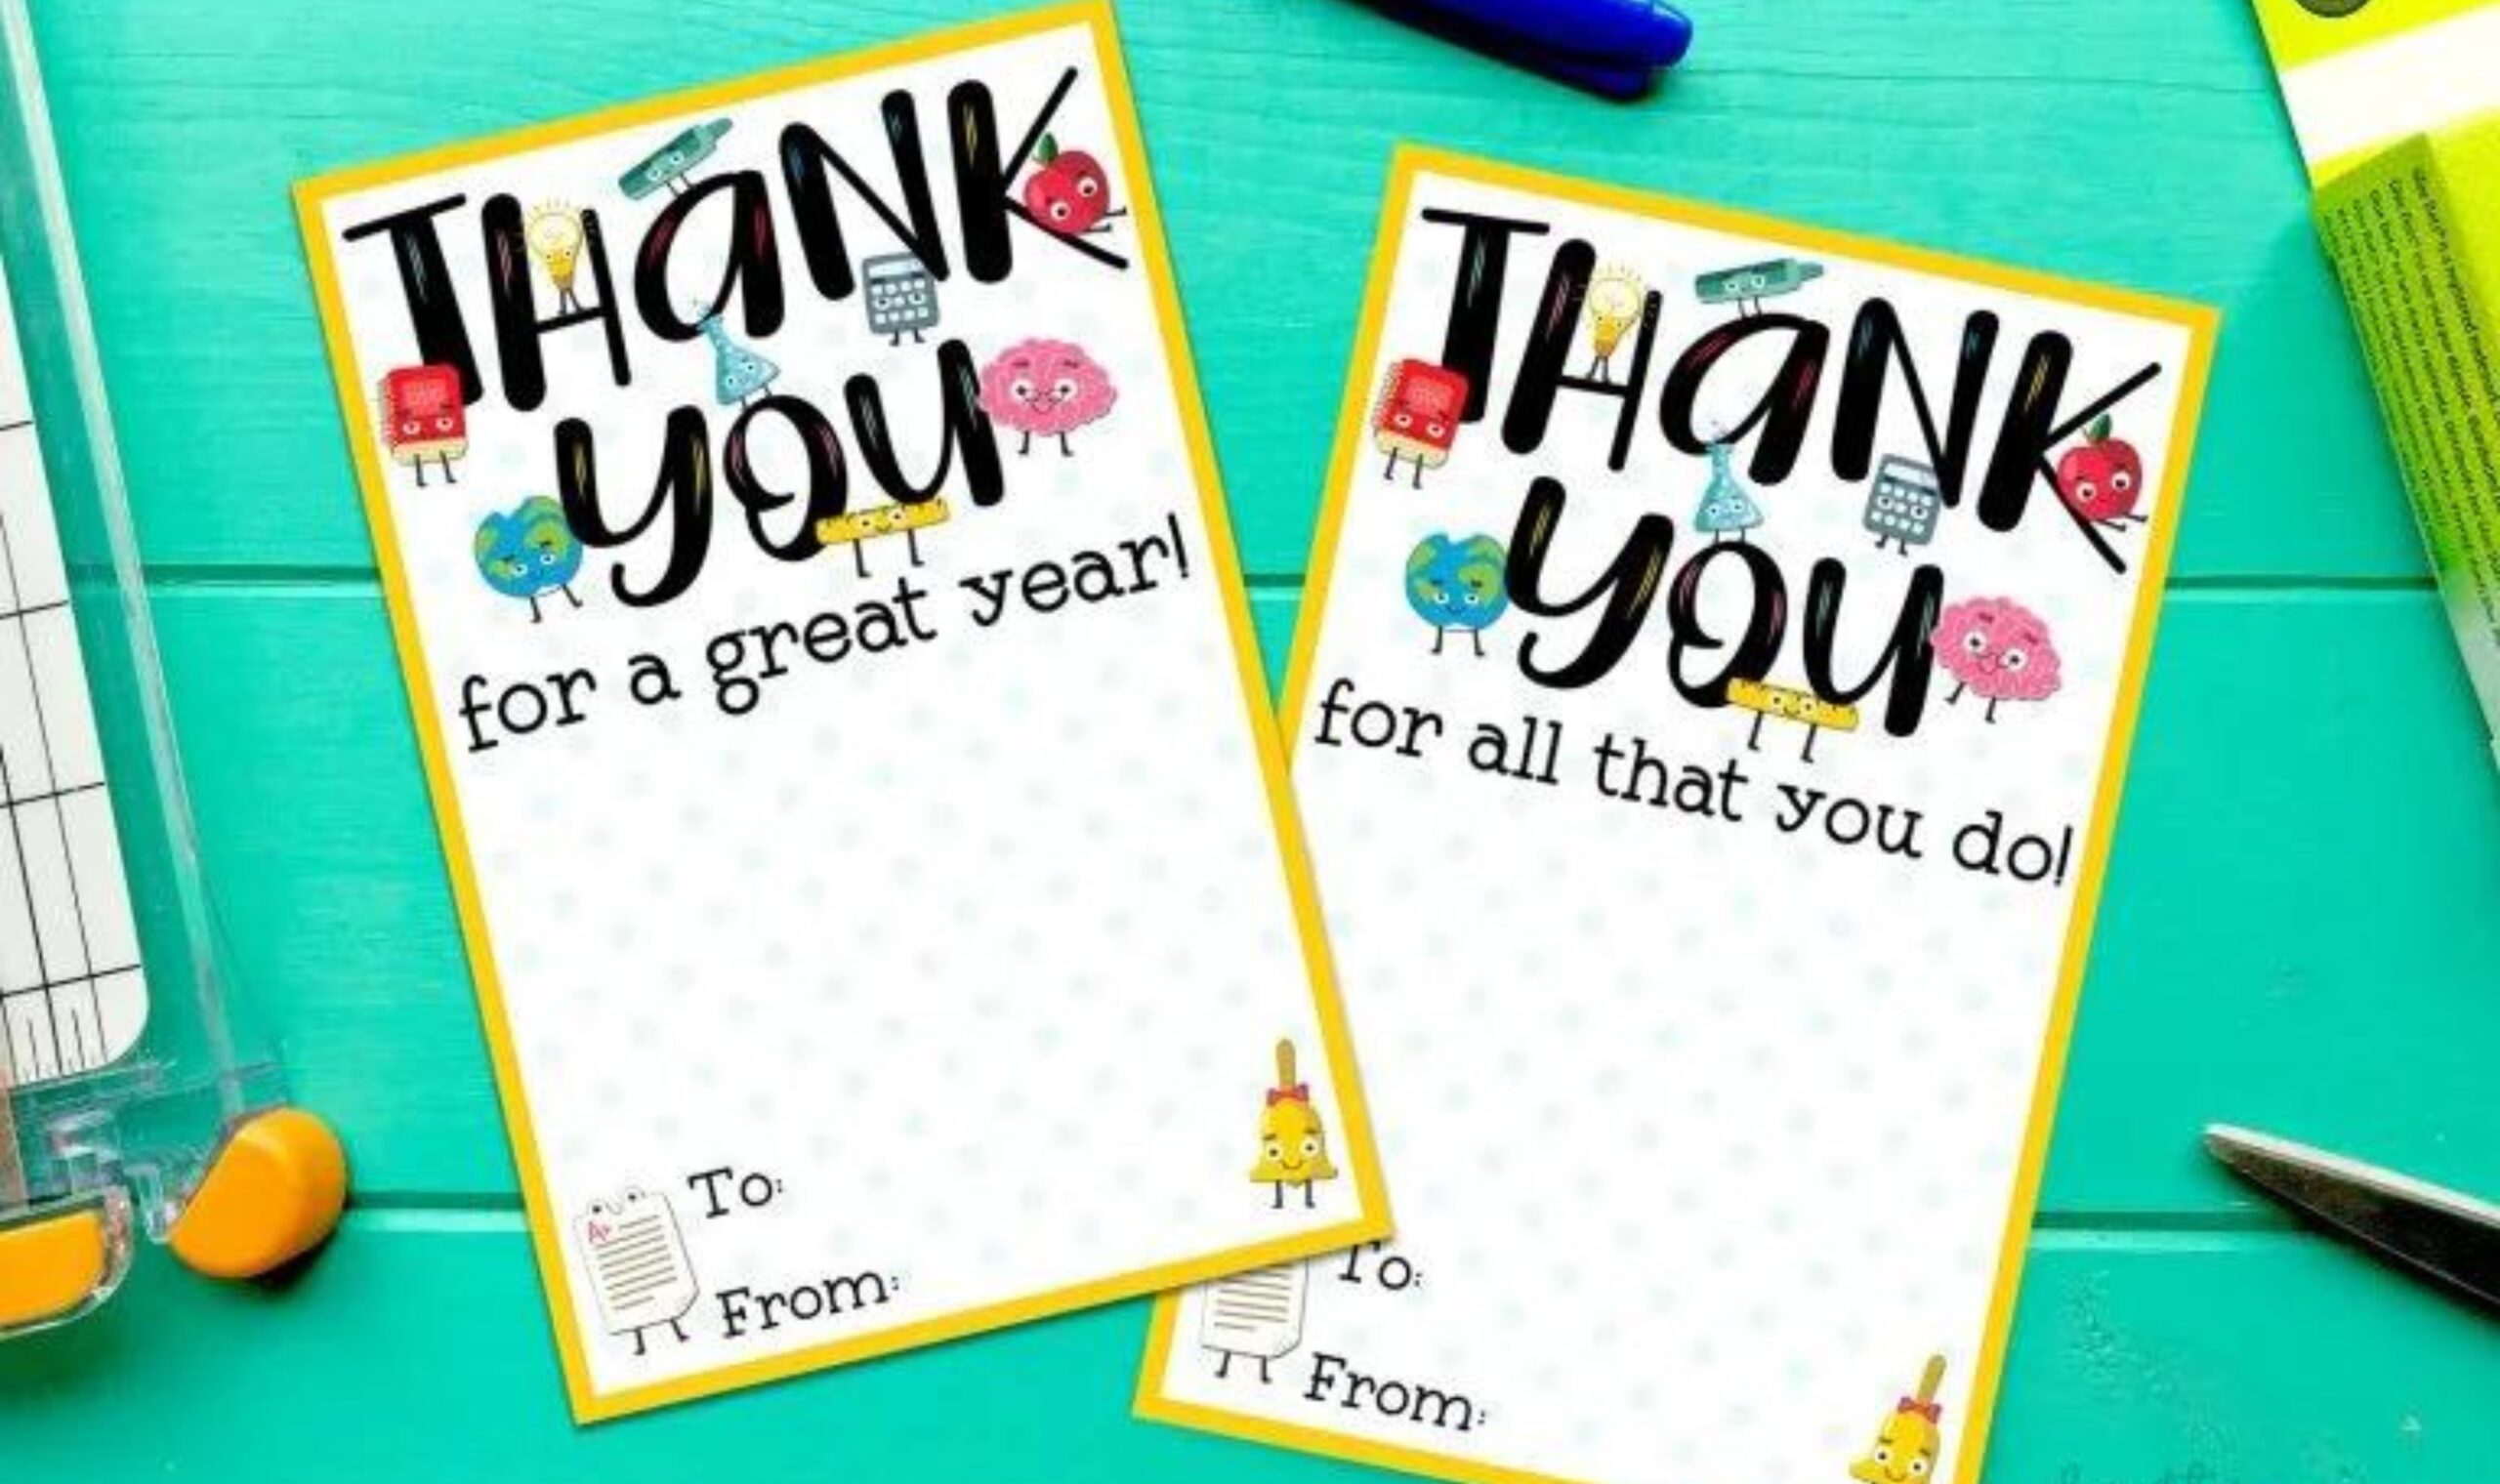 Image of thank you cards with little fluffy monsters on them